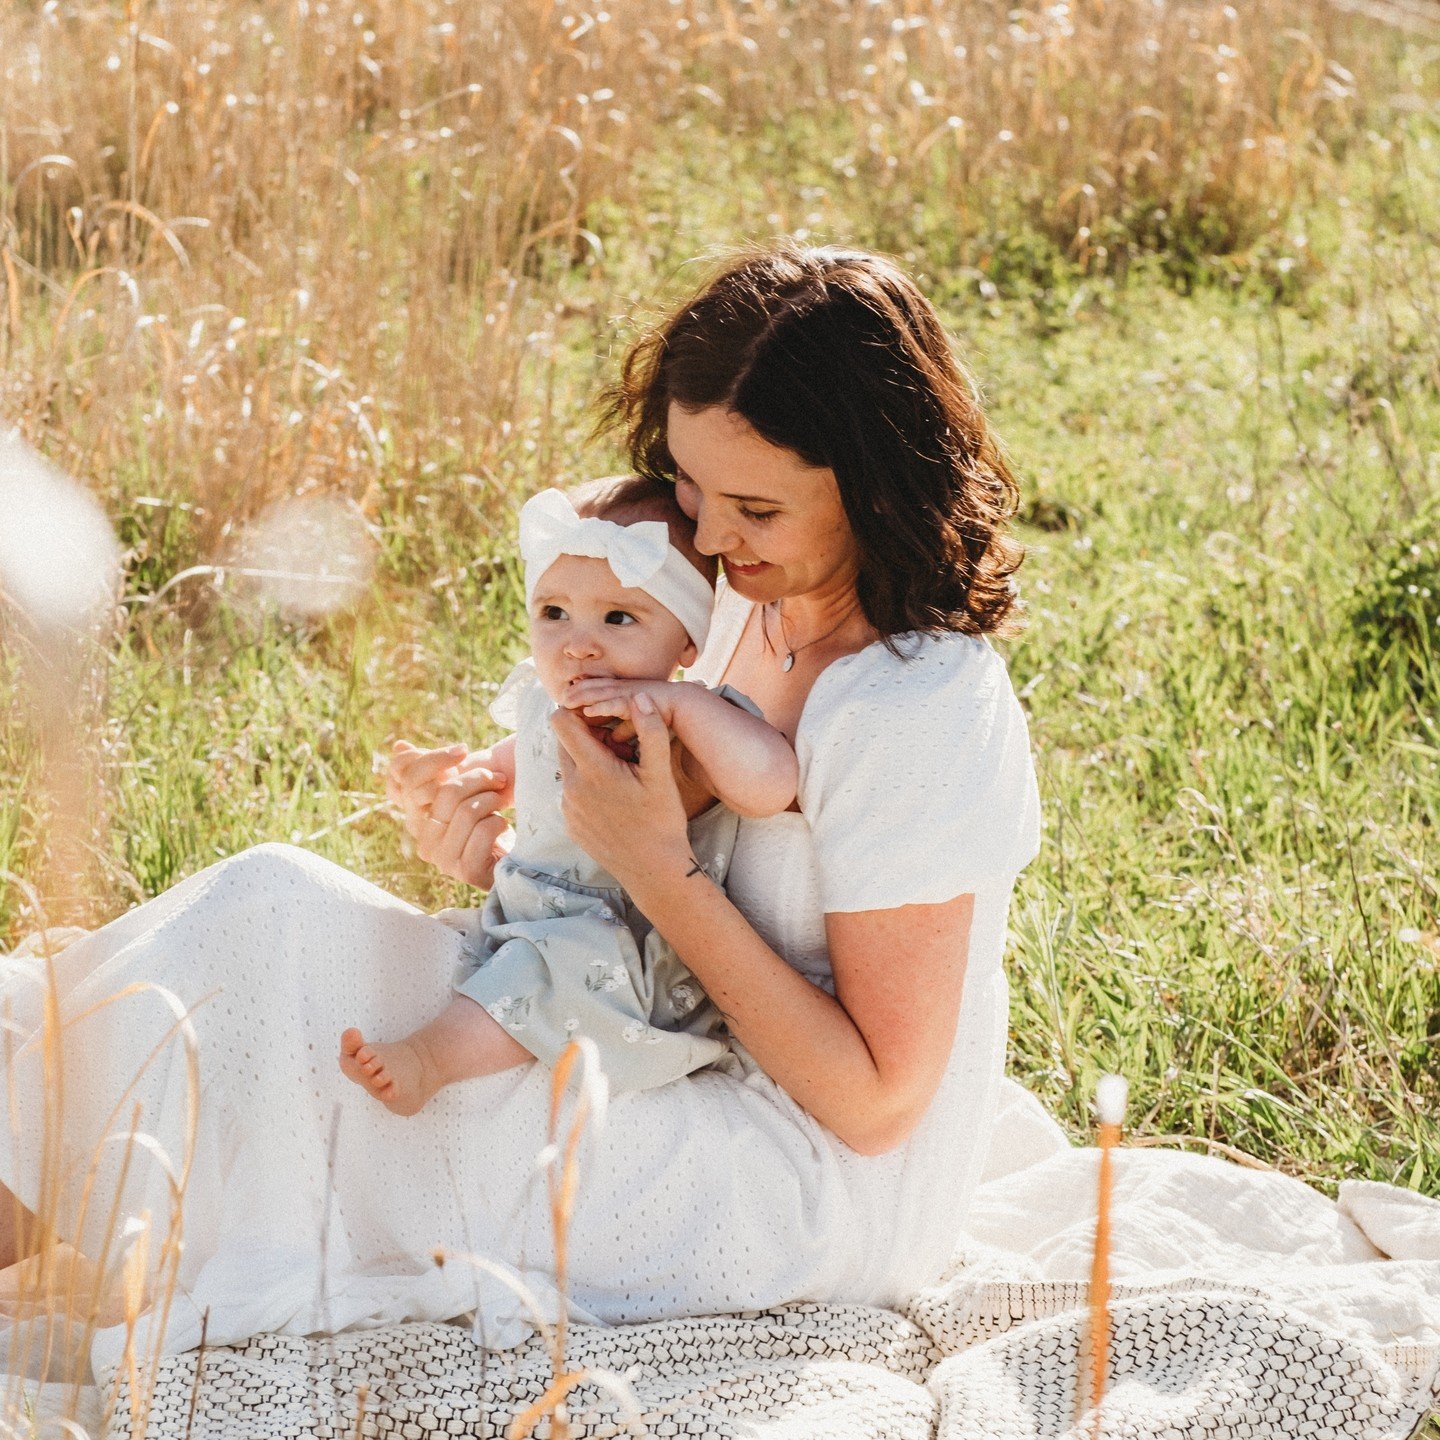 🌸 Happy Belated Mother's Day! 🌸

Motherhood.

All the words they say when you get pregnant or expect a child. &quot;It will be hard,&quot; they say, &quot;they'll cry, you'll have no sleep,&quot; etc. But what they don't tell you: You will love the